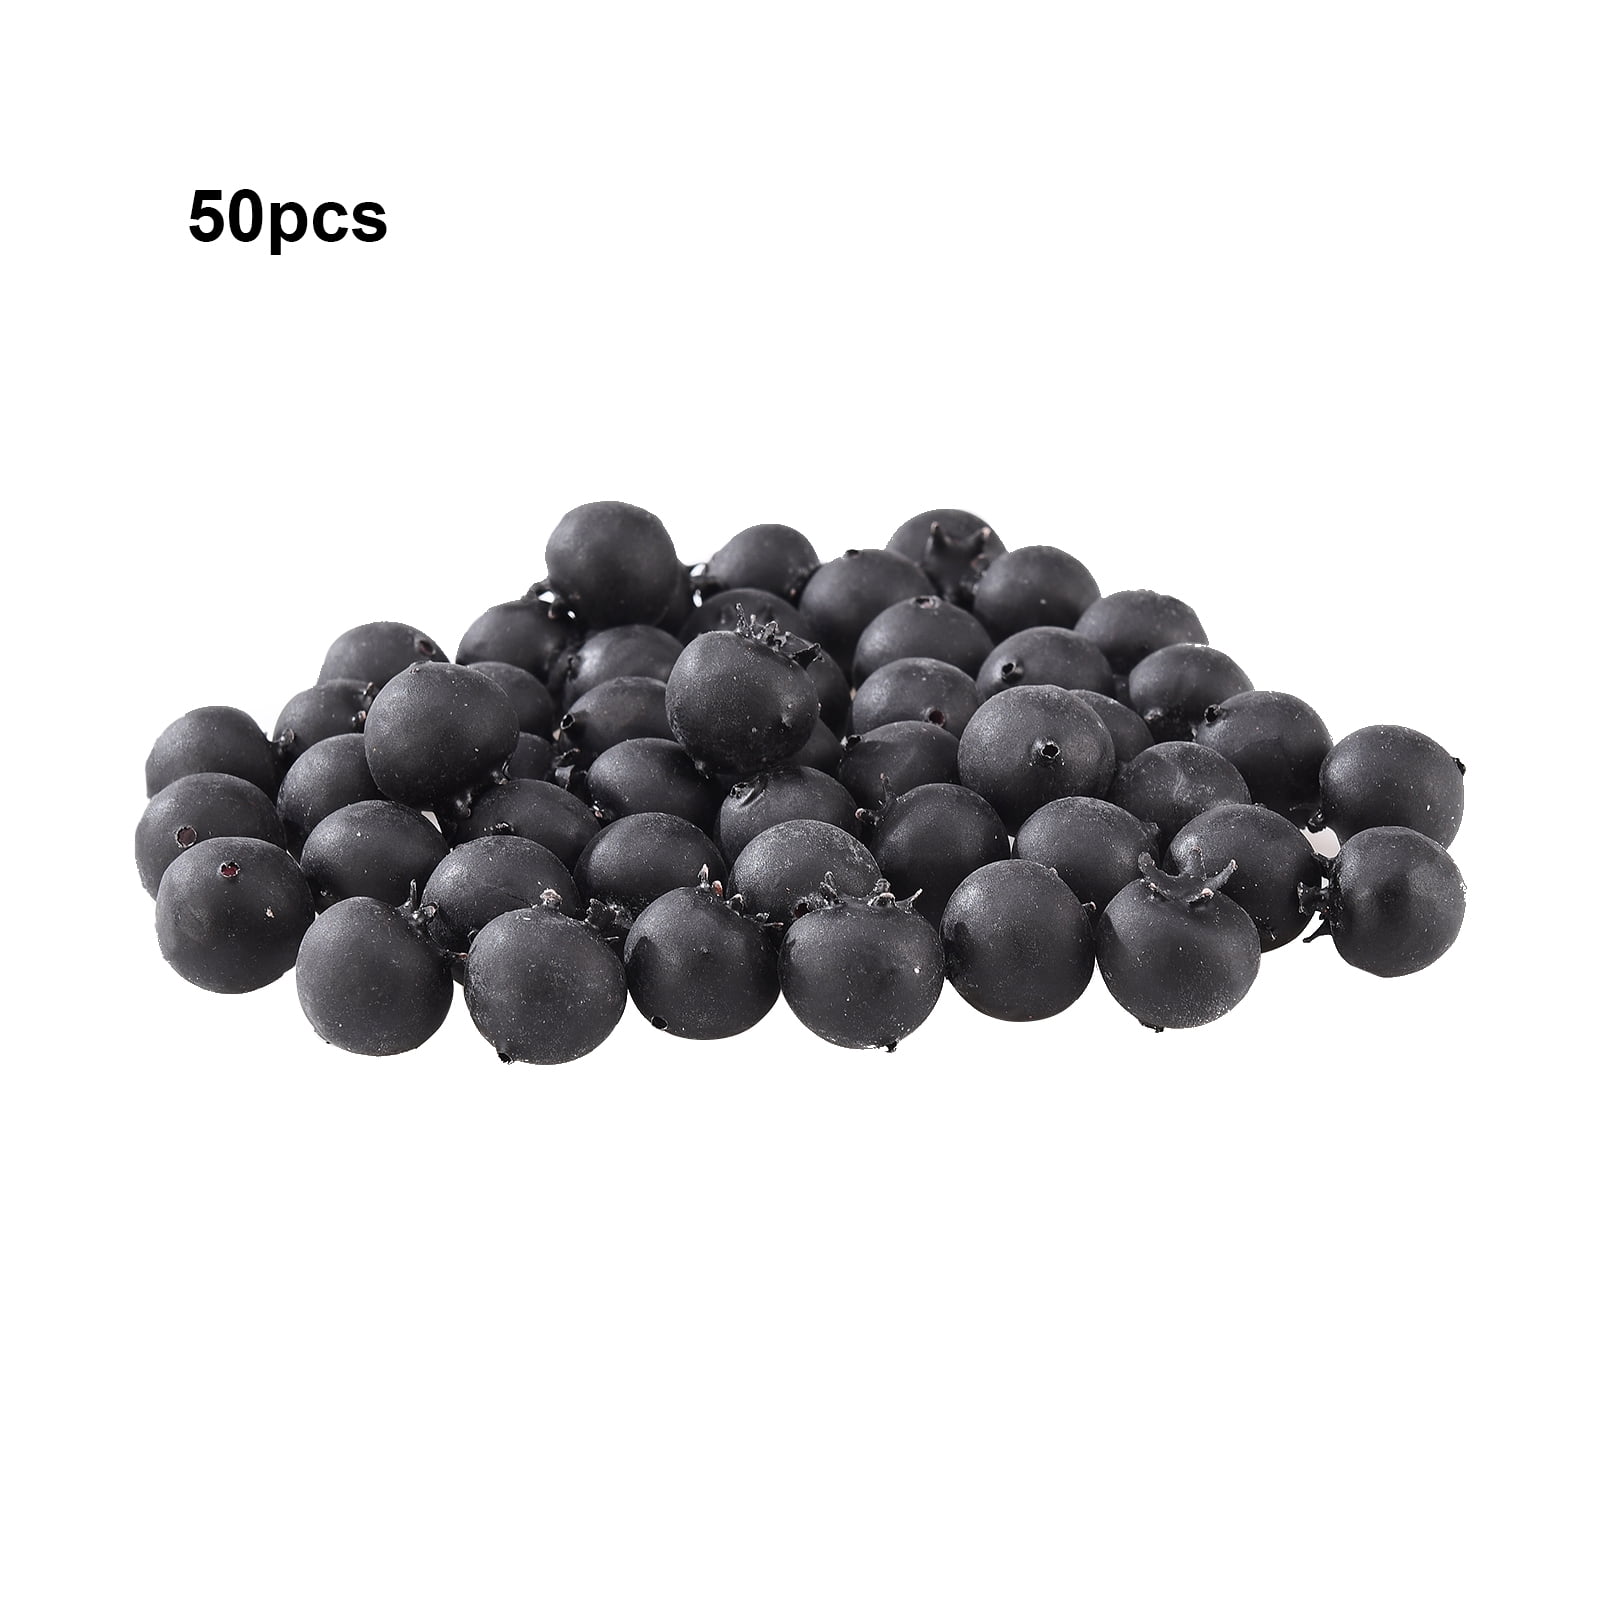 50pcs Artificial Blueberry Craft Fake Fruit Blueberries Home Cabinet Decor Props 